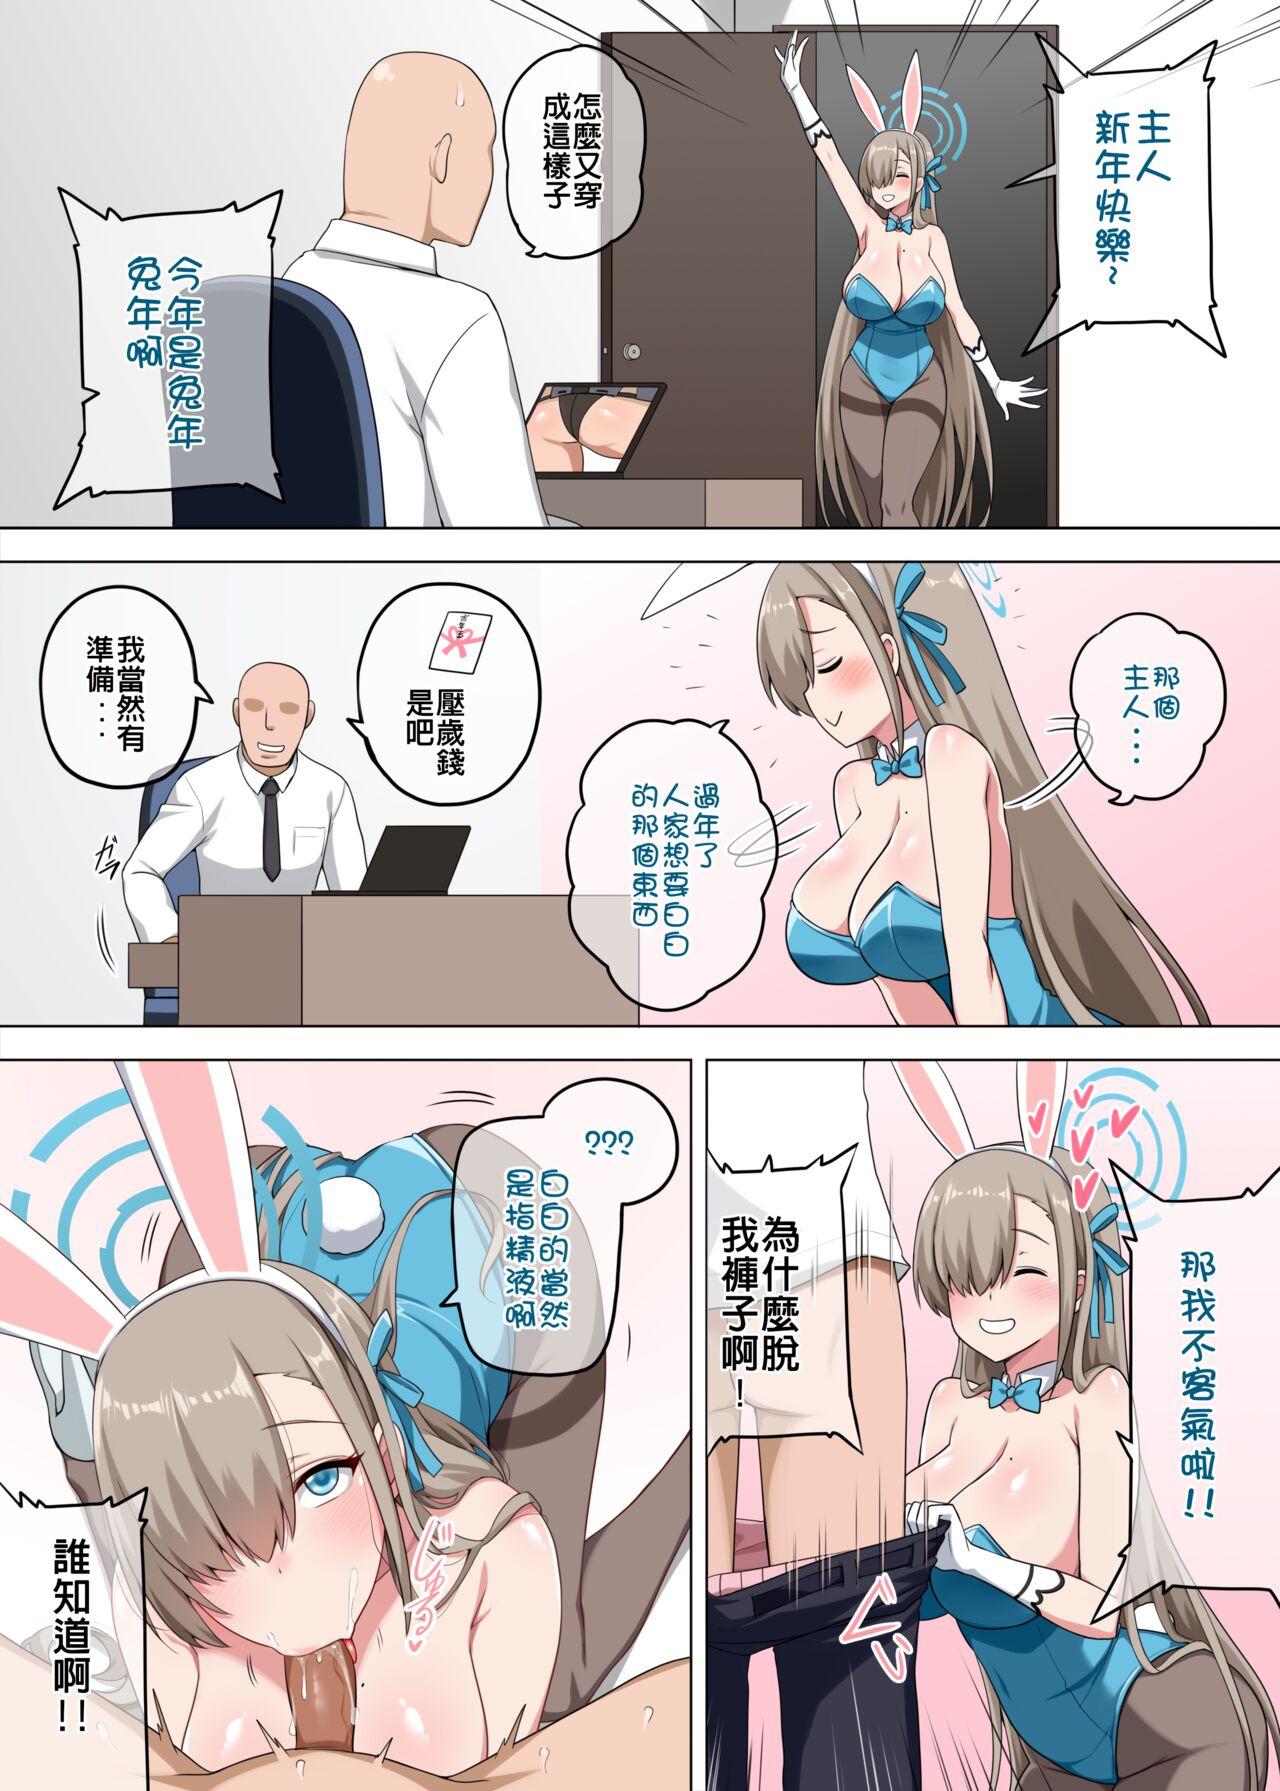 Foreplay Asuna Bunny Girl - Blue archive Dotado - Picture 1